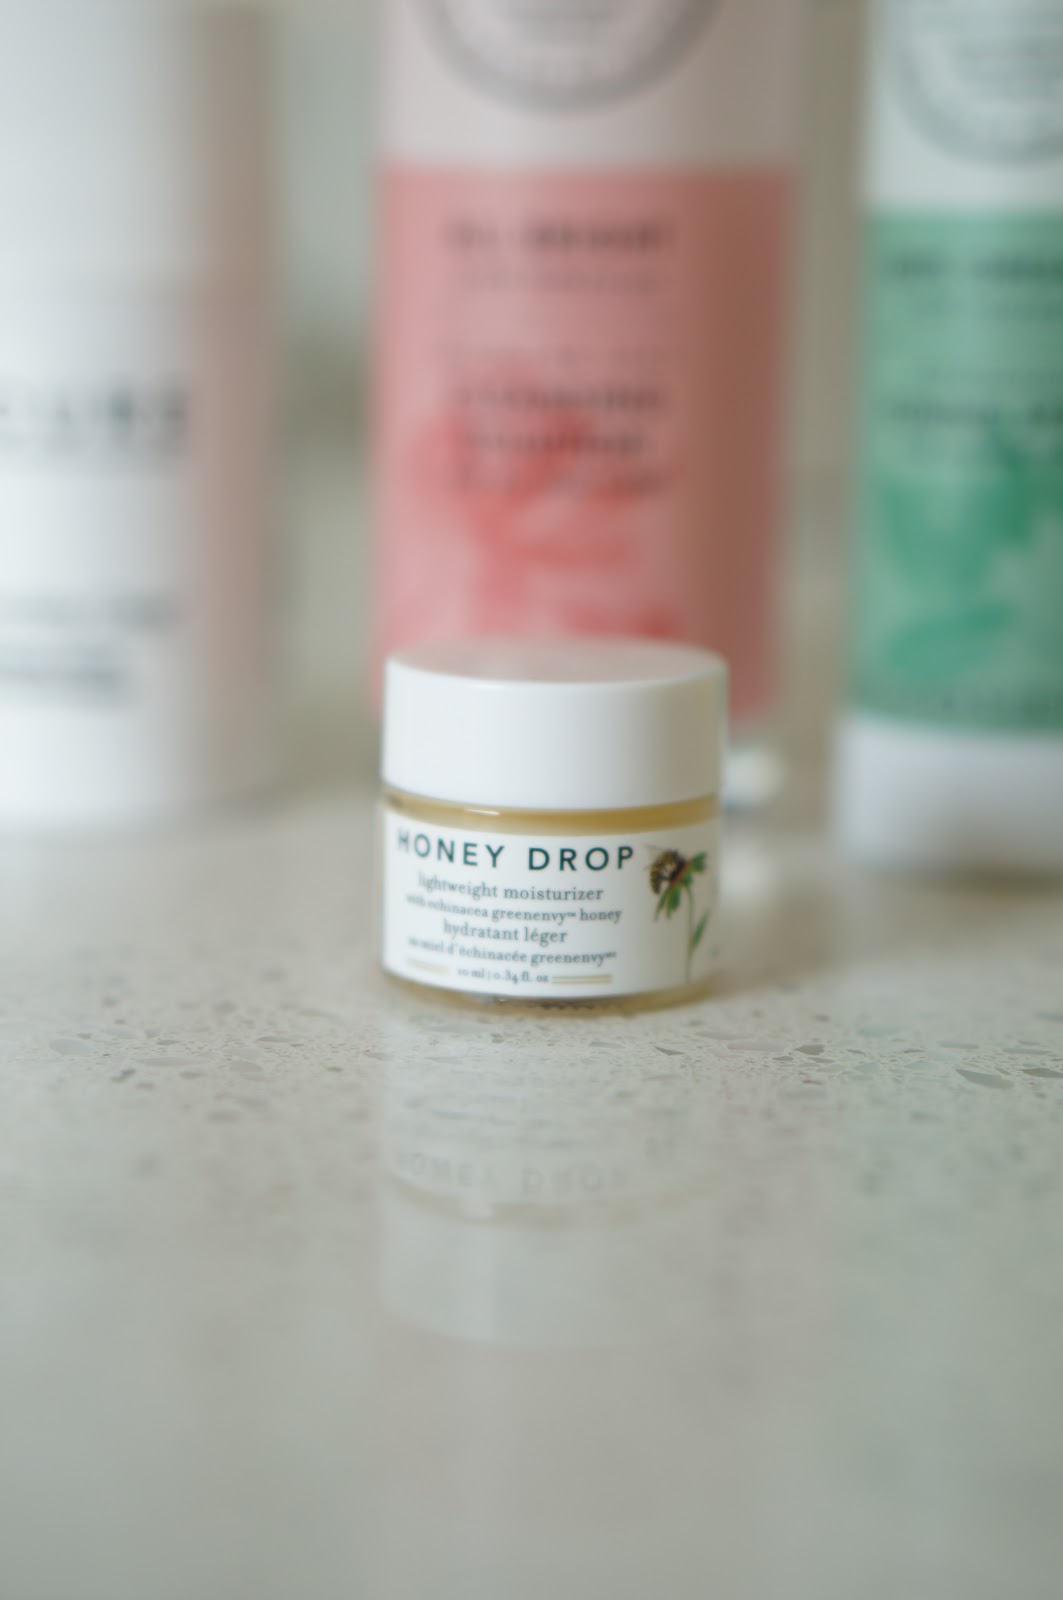 Popular North Carolina style blogger Rebecca Lately shares the recent additions to her cruelty free skincare routine.  Check it out to see what she's been using!